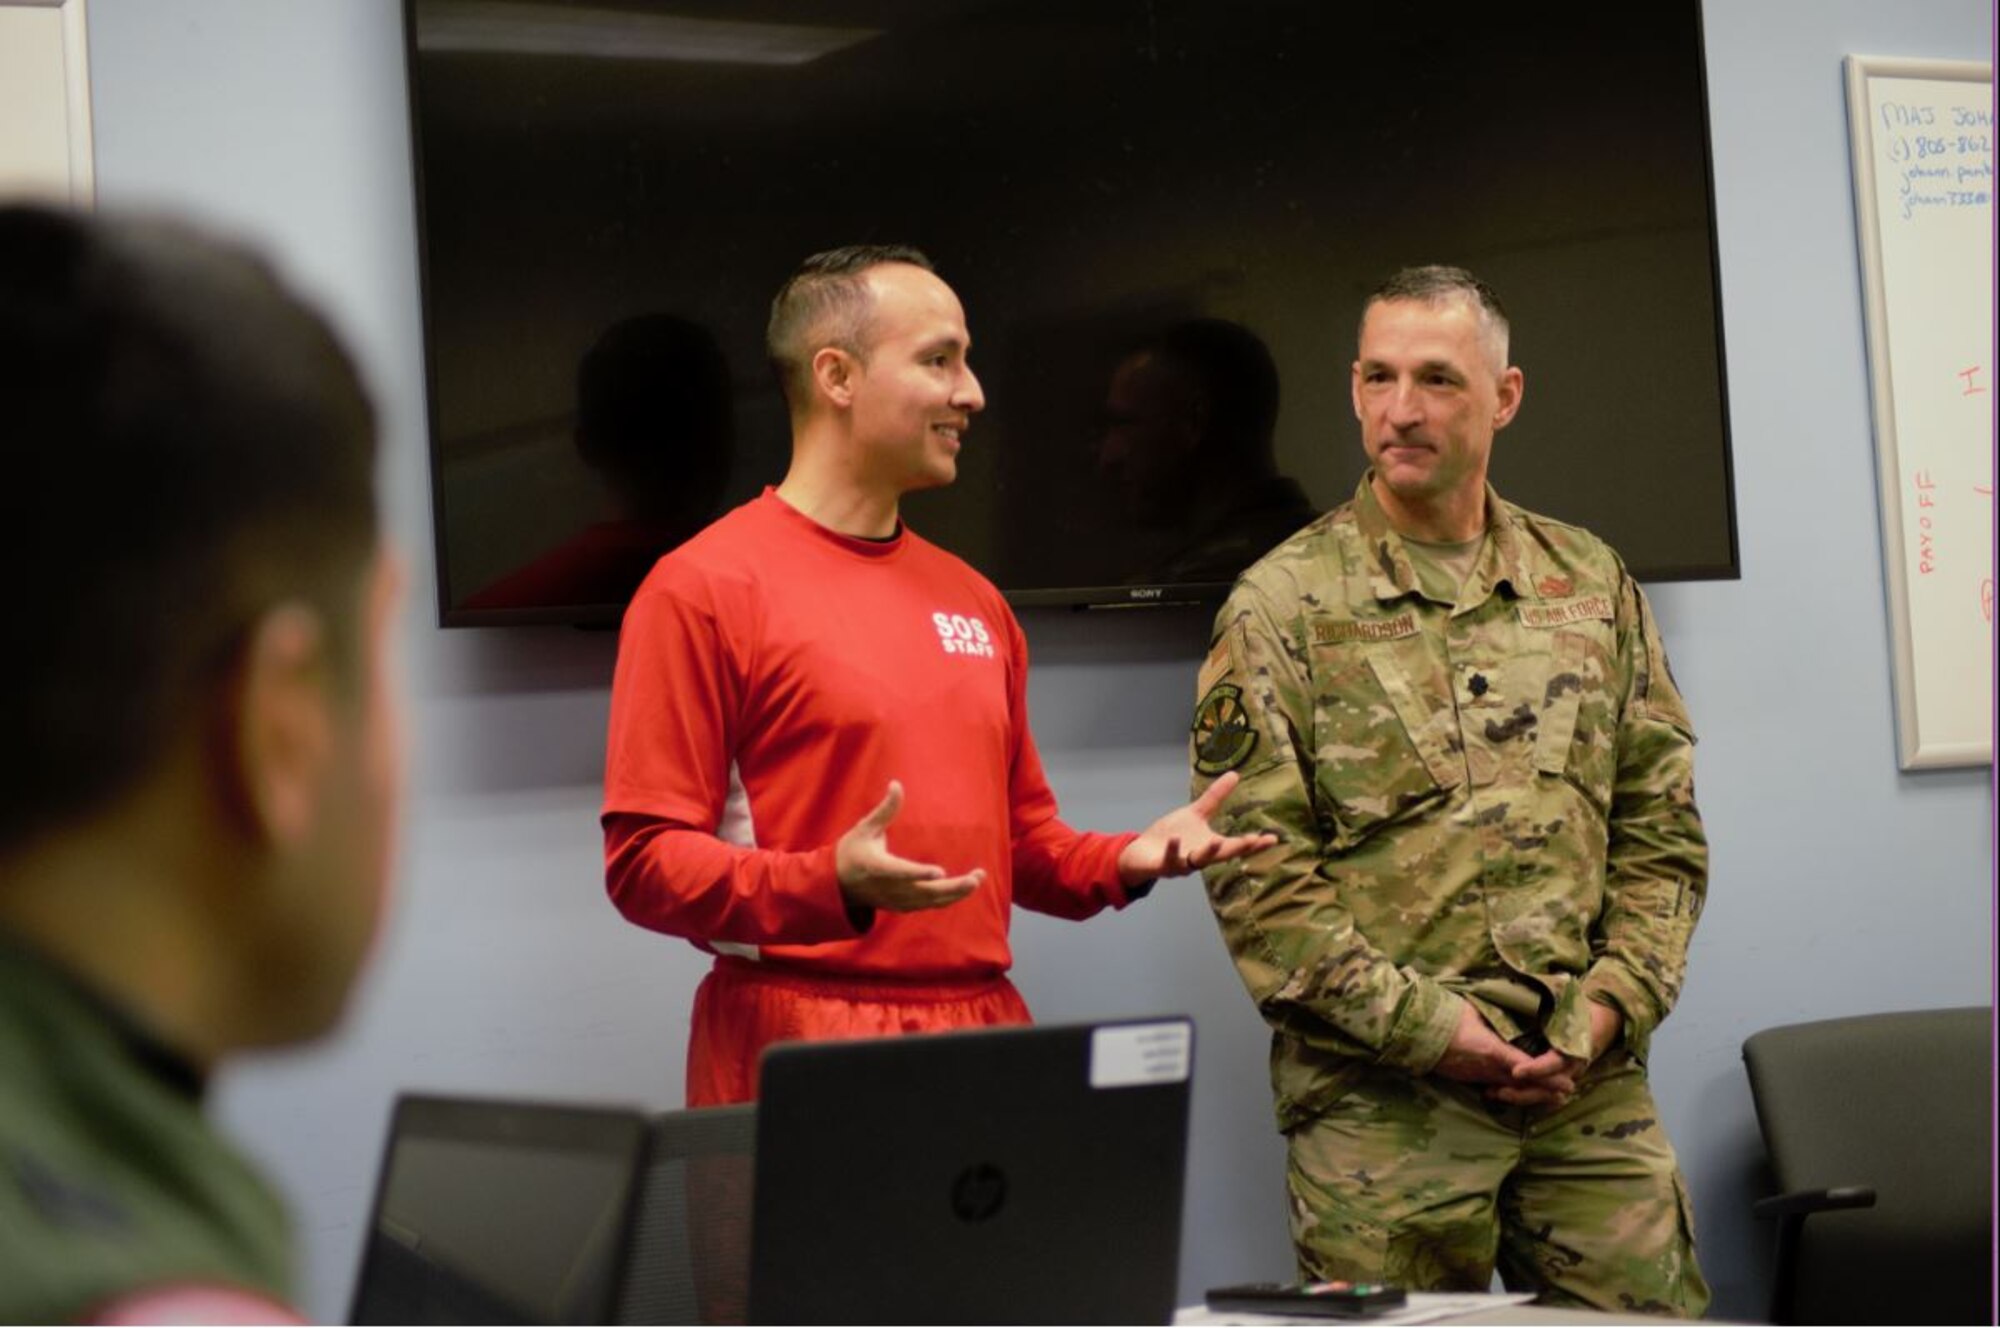 Major Johann Pambianchi (left), B-20 Flight commander, 31st Student Squadron, Squadron Officer School, introduces Lt. Col. Duane Richardson as the flight’s senior mentor, Nov. 13, 2019. Richardson is an instructor for the Leader Development Course for Squadron Command at the Ira C. Eaker Center for Leadership Development. He and more than three dozen other senior leaders from across Air University and Maxwell volunteer their time to take part in SOS’s Senior Mentor Program, engaging with students multiple times throughout the 6.5-week school. (Courtesy photo)